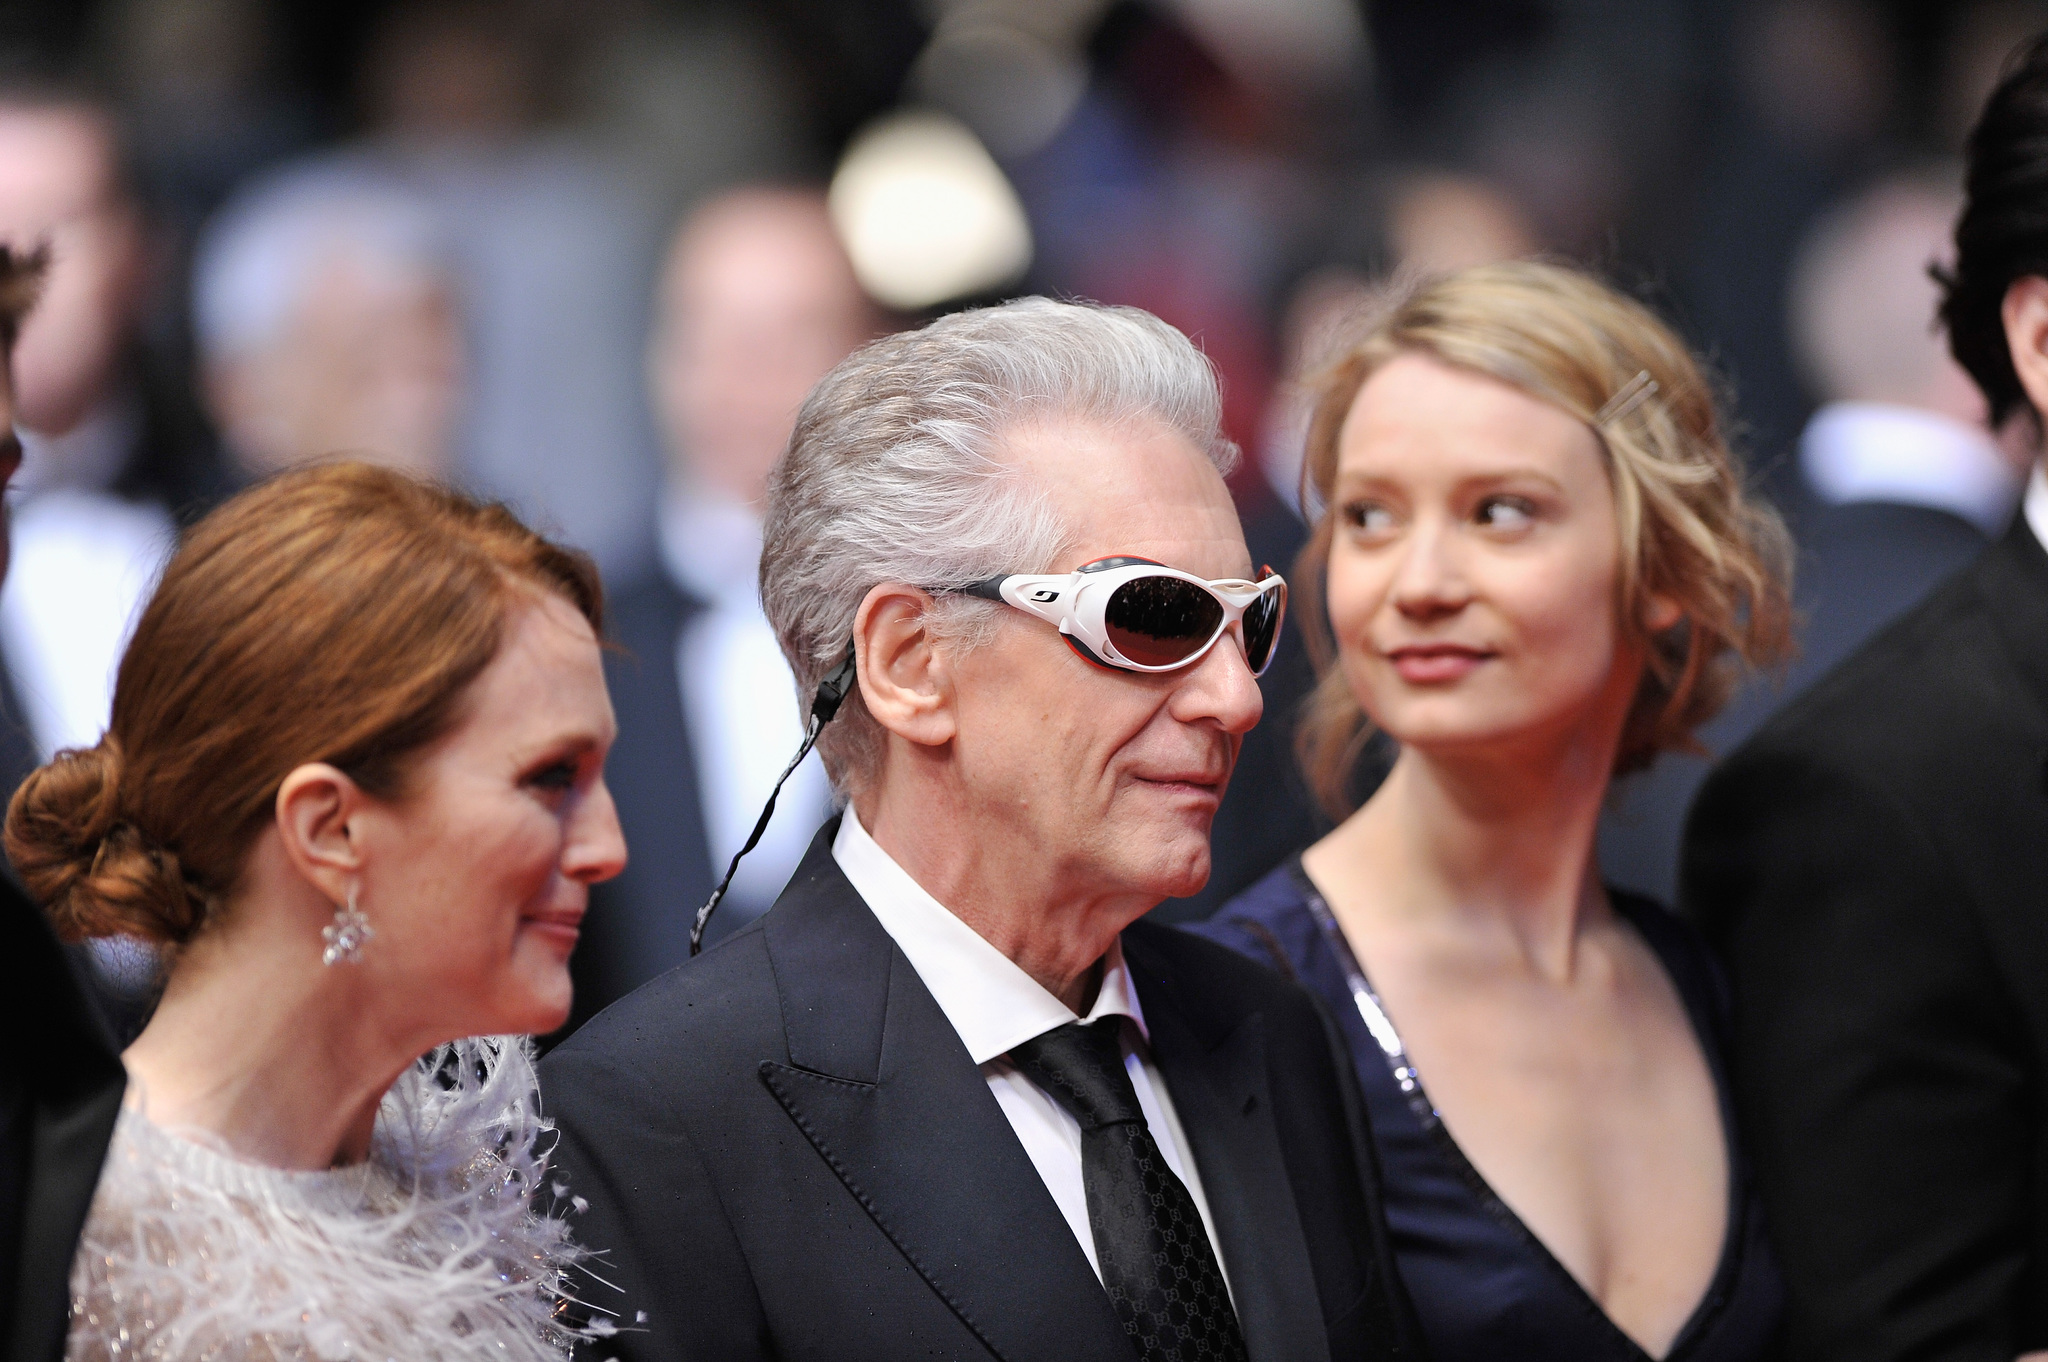 Julianne Moore, David Cronenberg and Mia Wasikowska at event of Maps to the Stars (2014)